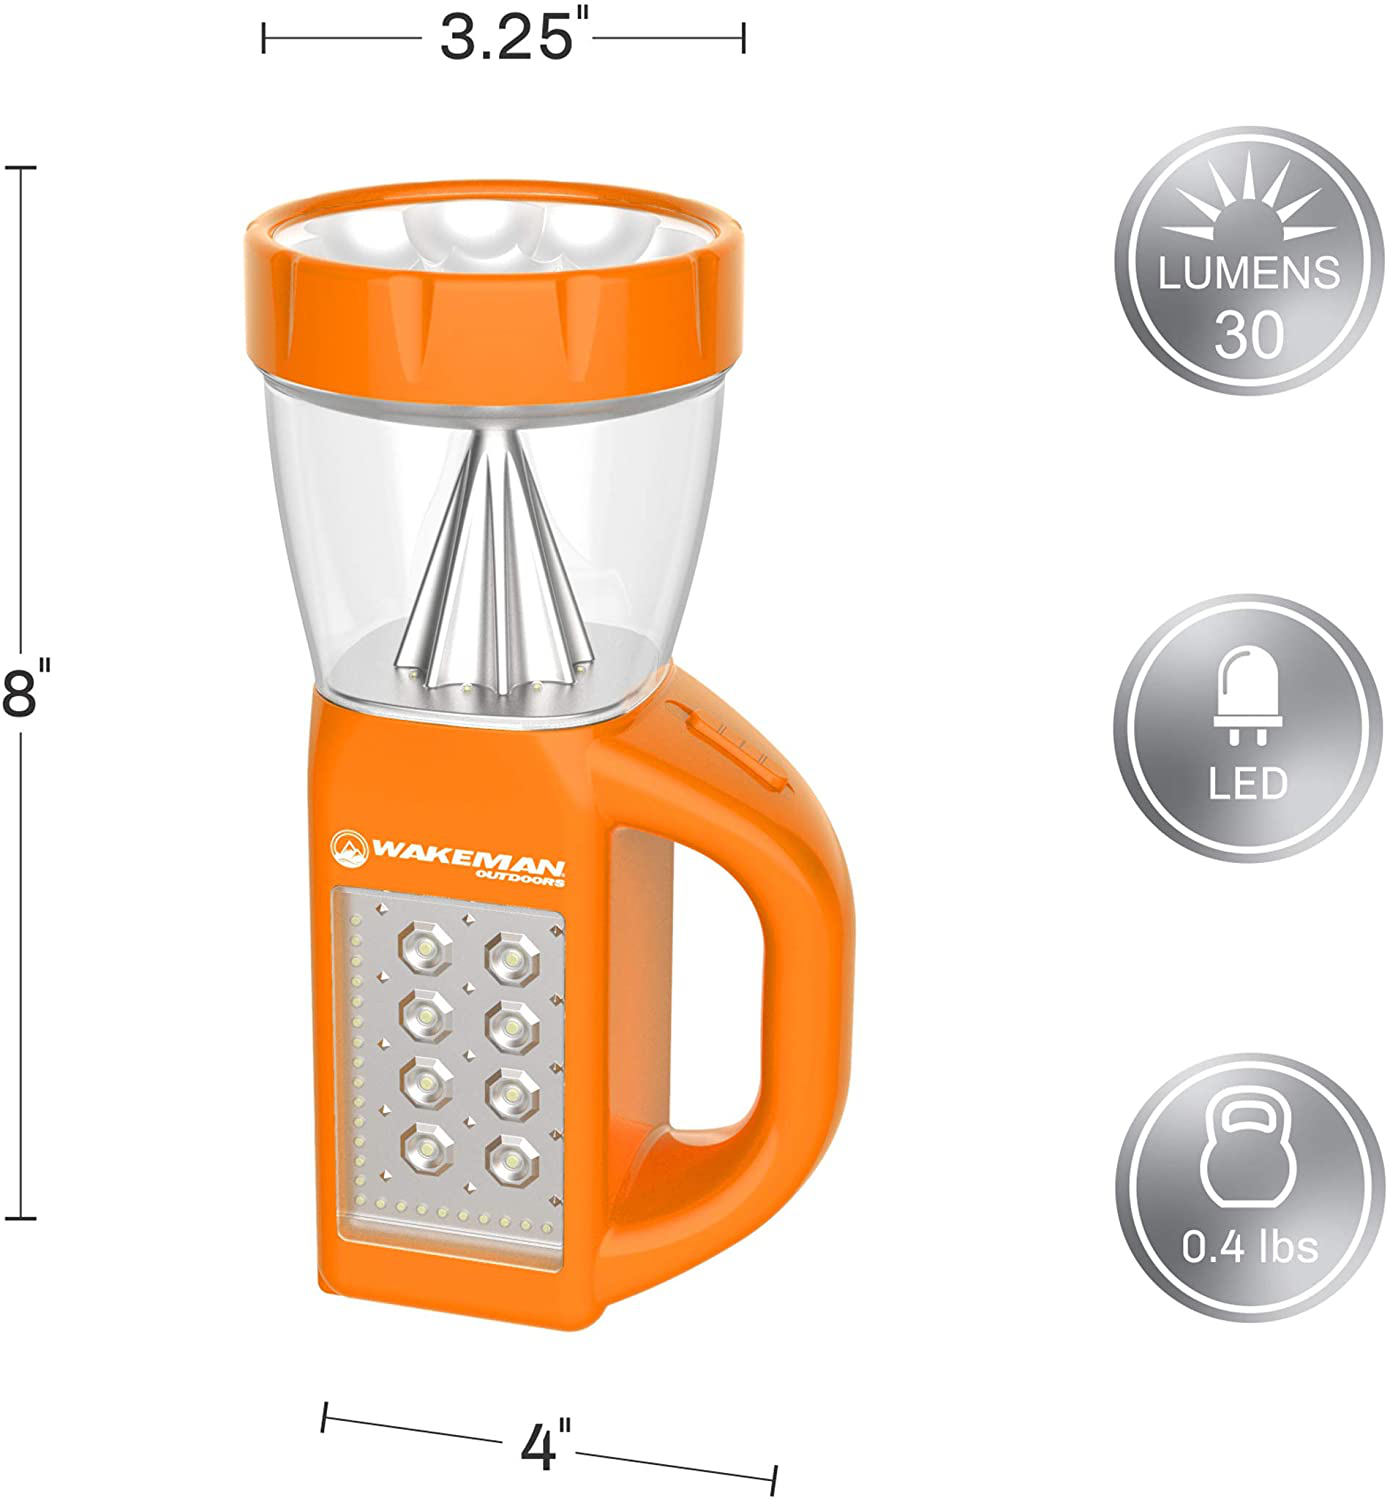 LED Lantern Flashlight Combo- 3-In-1 Lightweight Lamp with Side Panel Light- Portable for Camping, Hiking & Emergencies by Wakeman Outdoors (Orange)